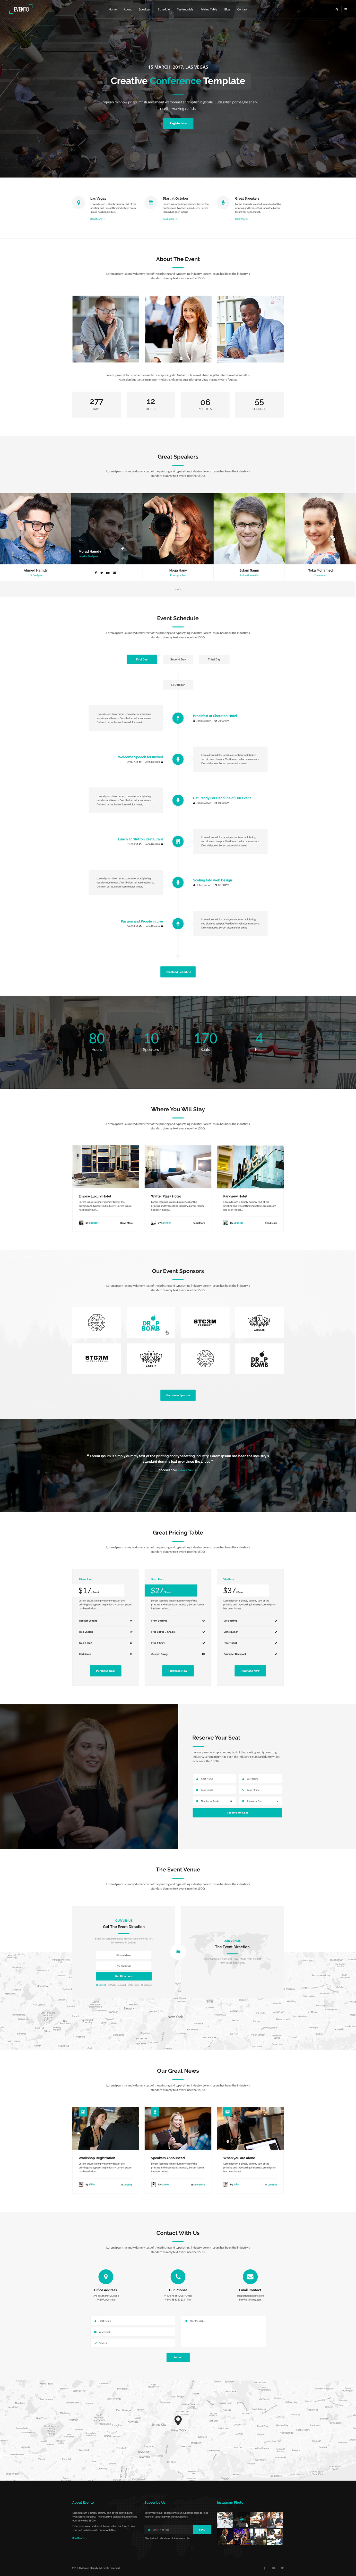 Evento - Conference & Event PSD Template